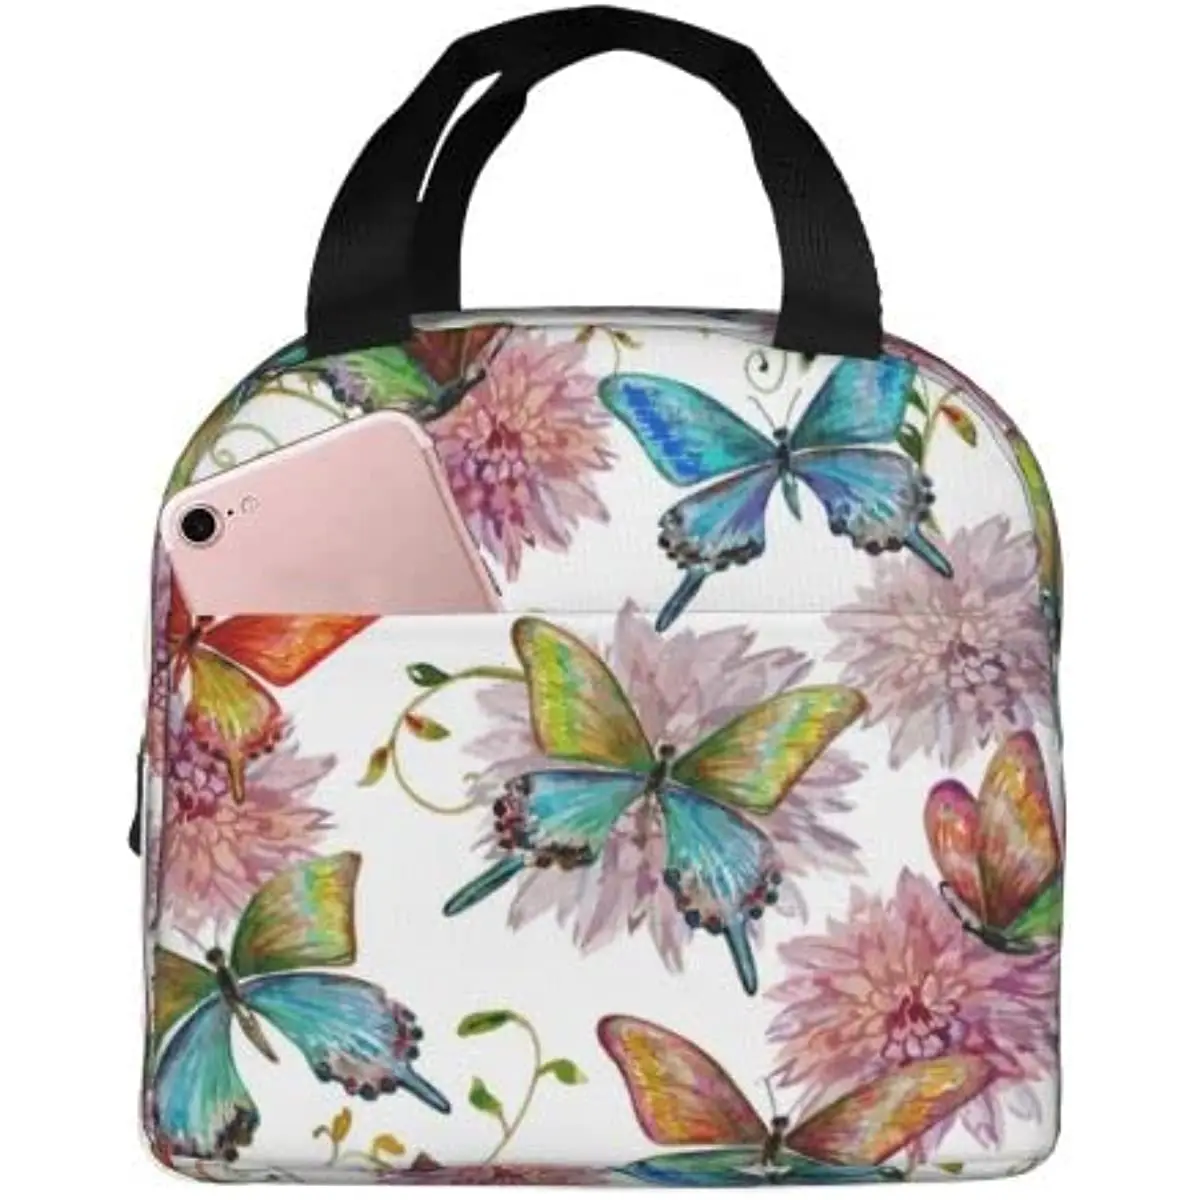 

Butterfly Lunch Bag Insulated Lunch Box for Women Reusable Therma Keep Food Cold Hot for Mom's Choice